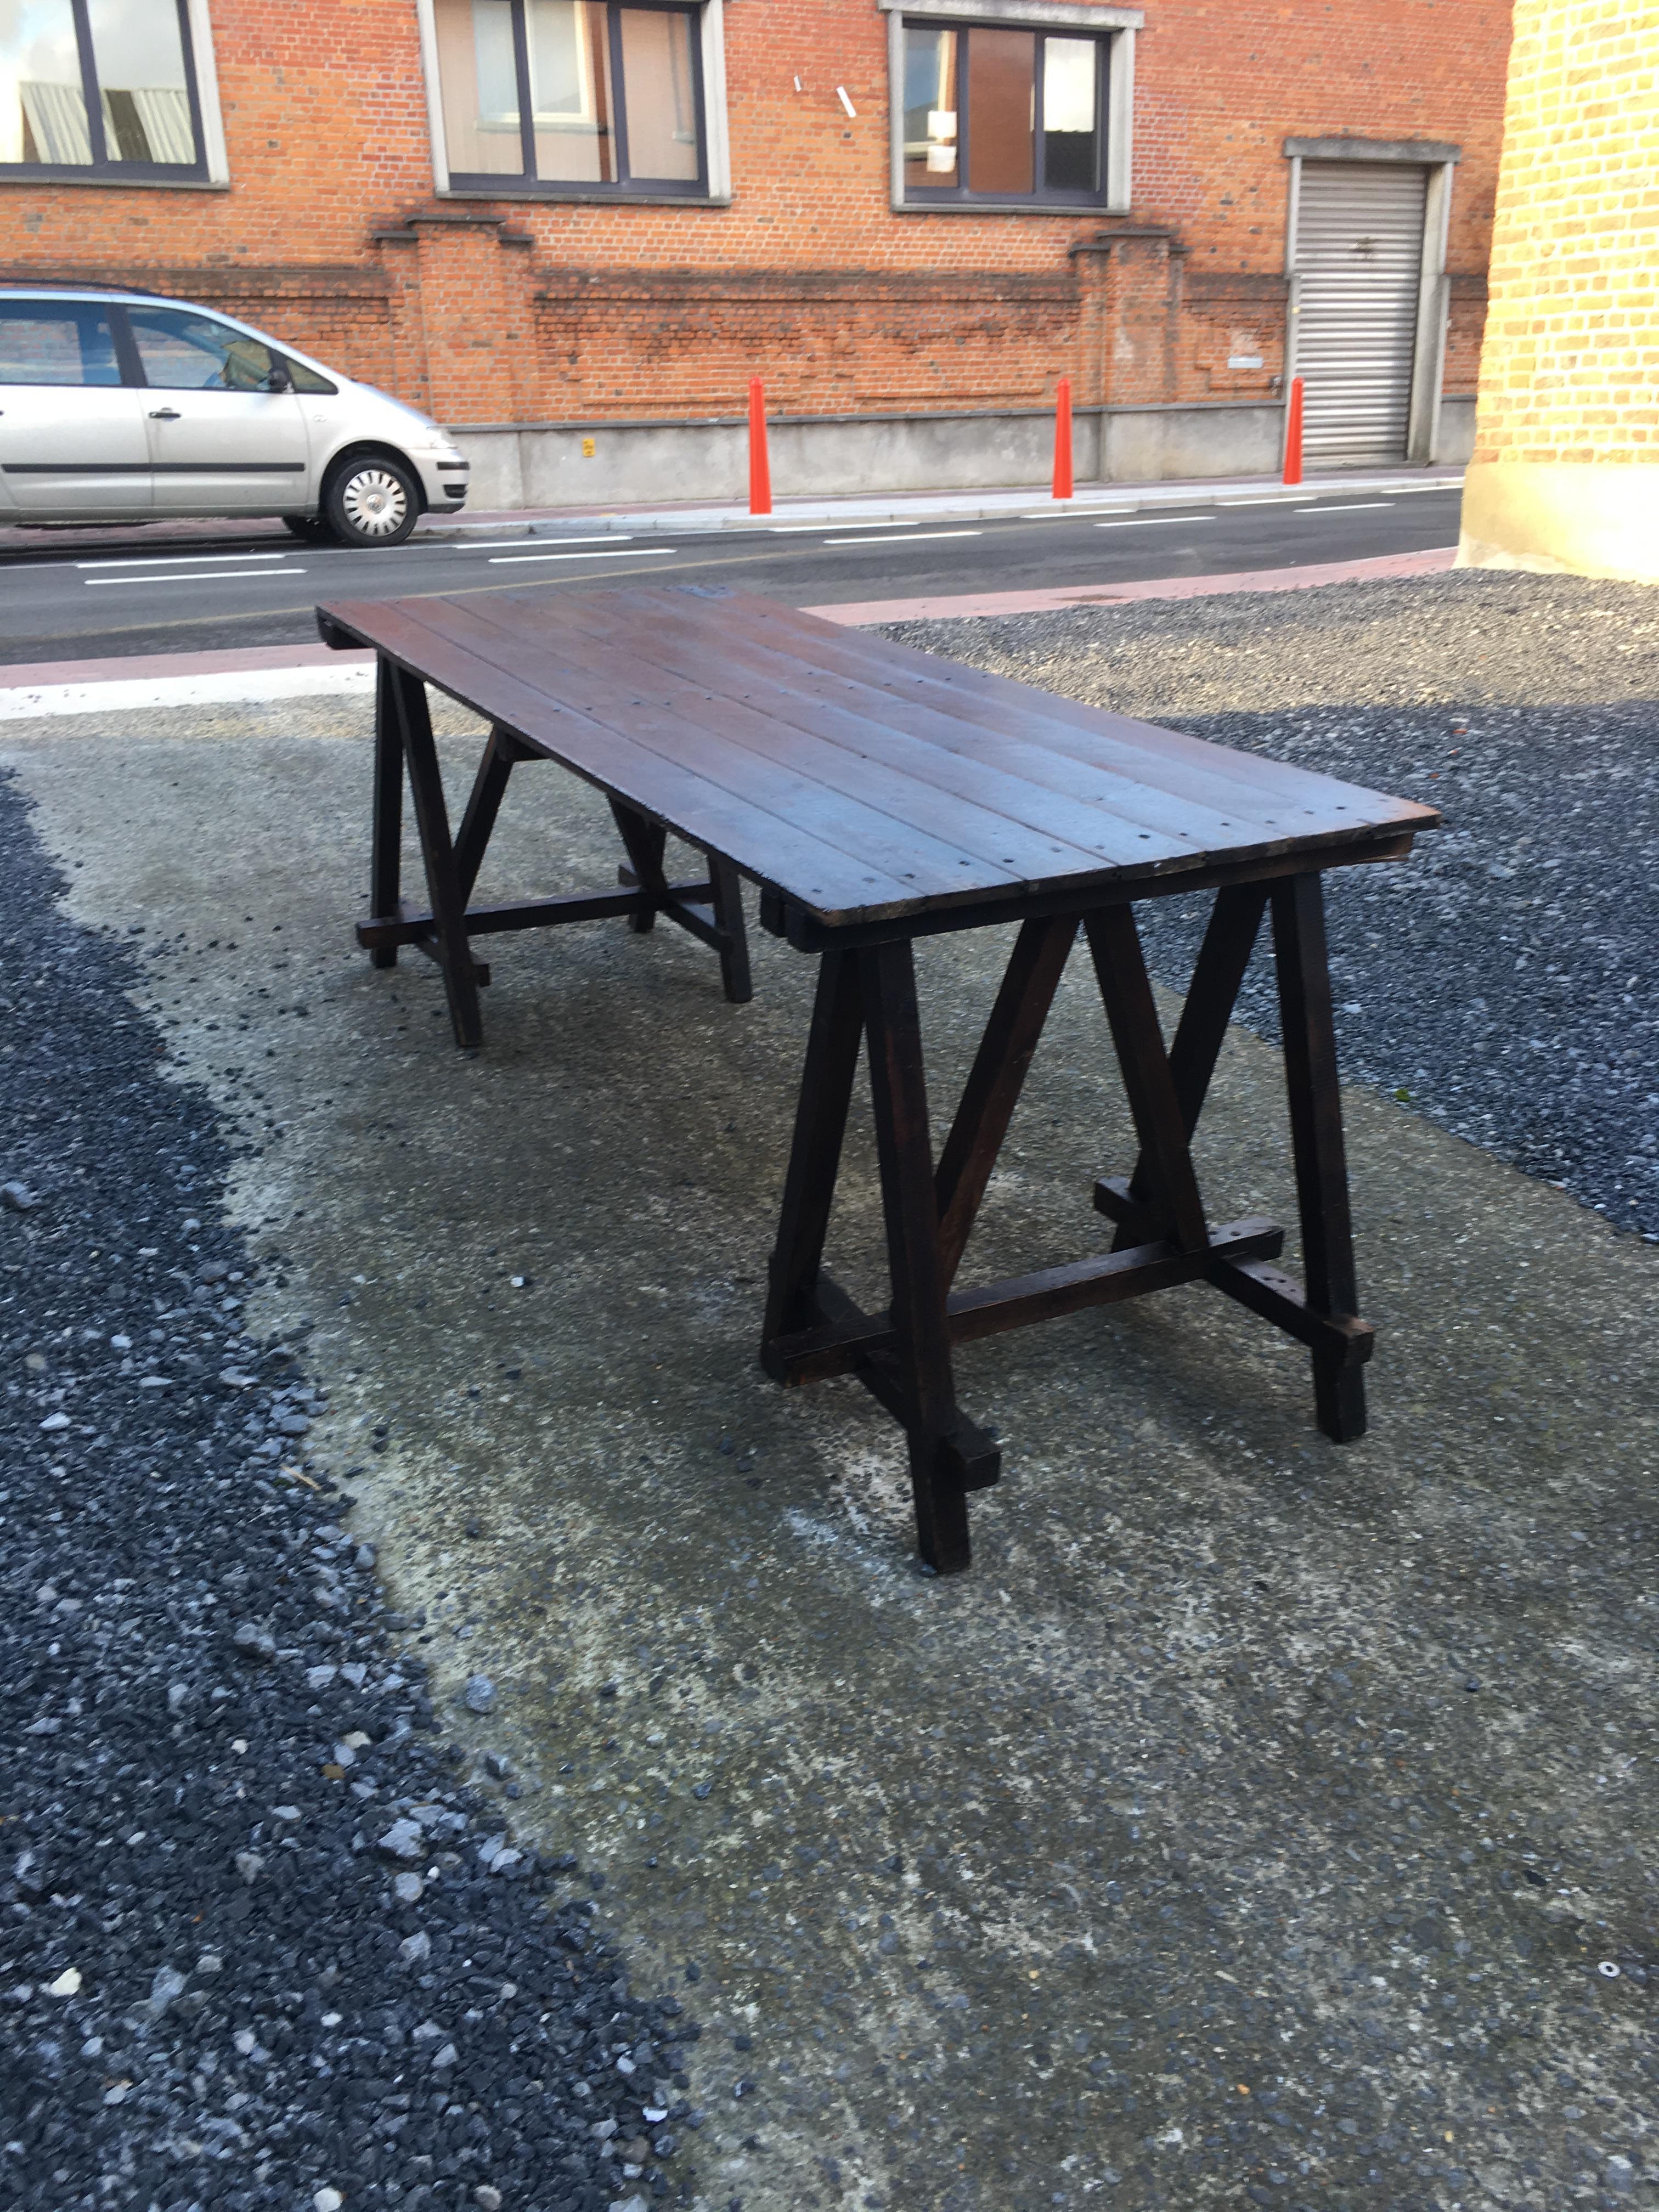 Large antique French trestle table, circa 1930
Usual wear and small gaps, see photos.